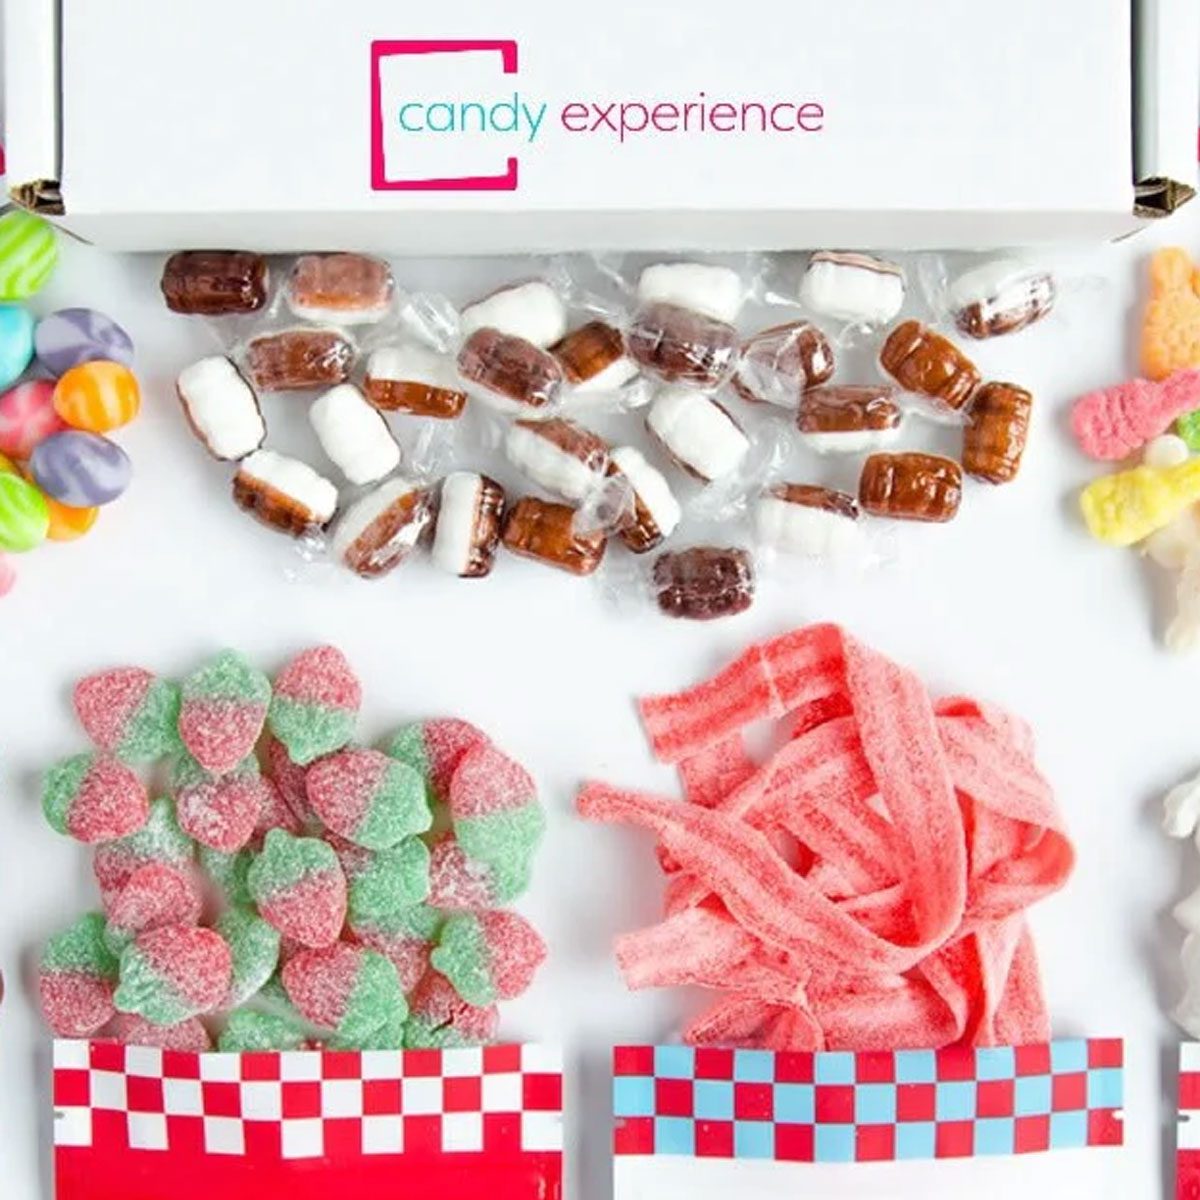 Candy Experience Gourmet Treat Box 